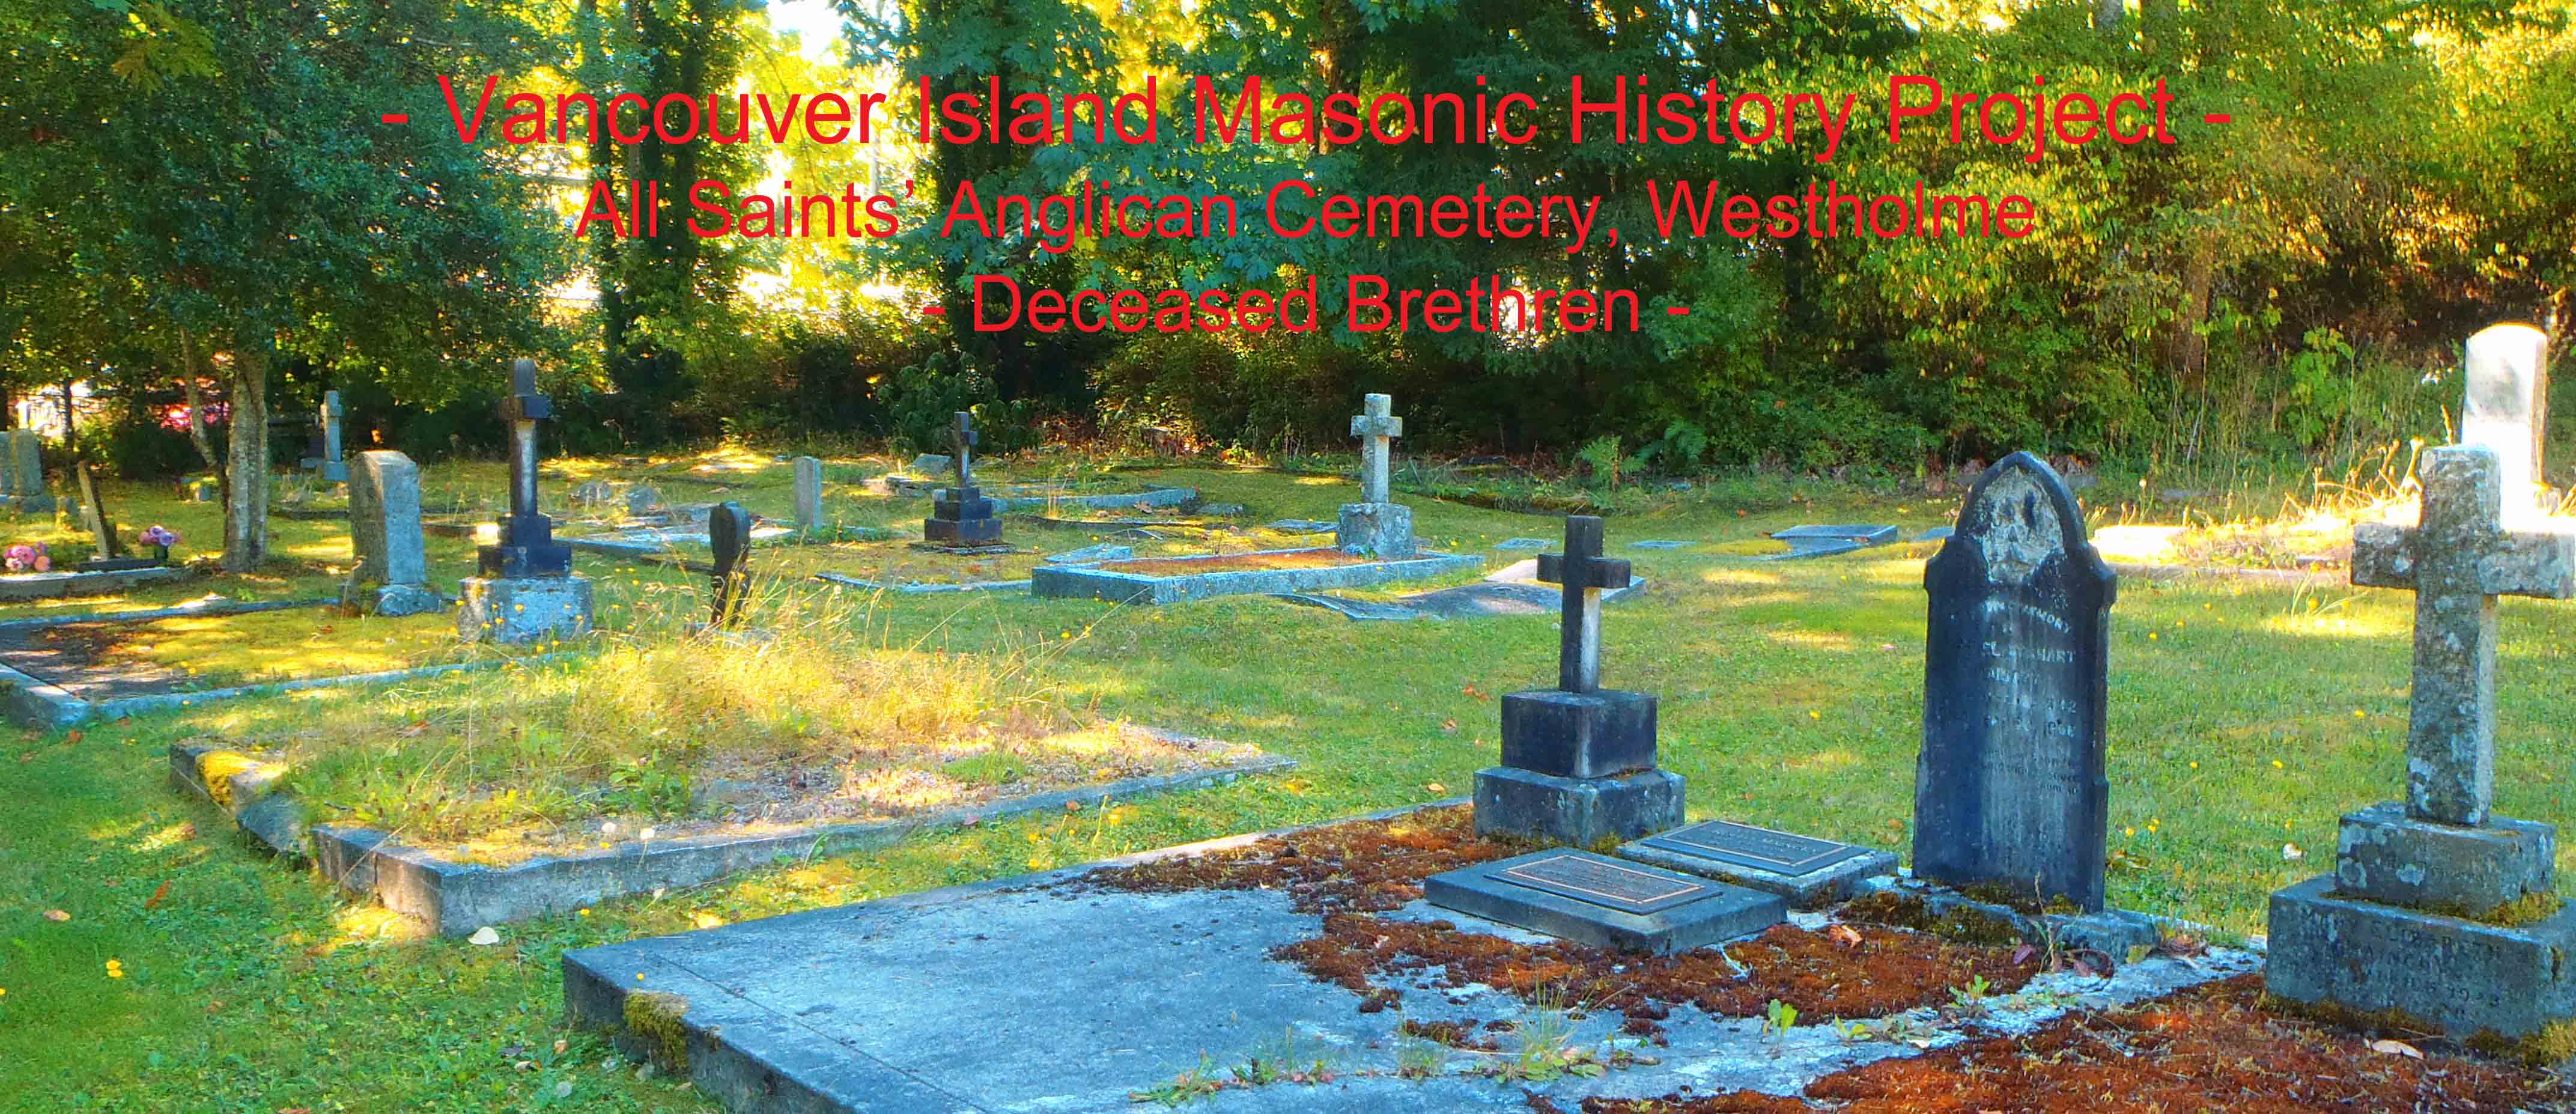 All Saints' Anglican cemetery, Westholme, B.C.